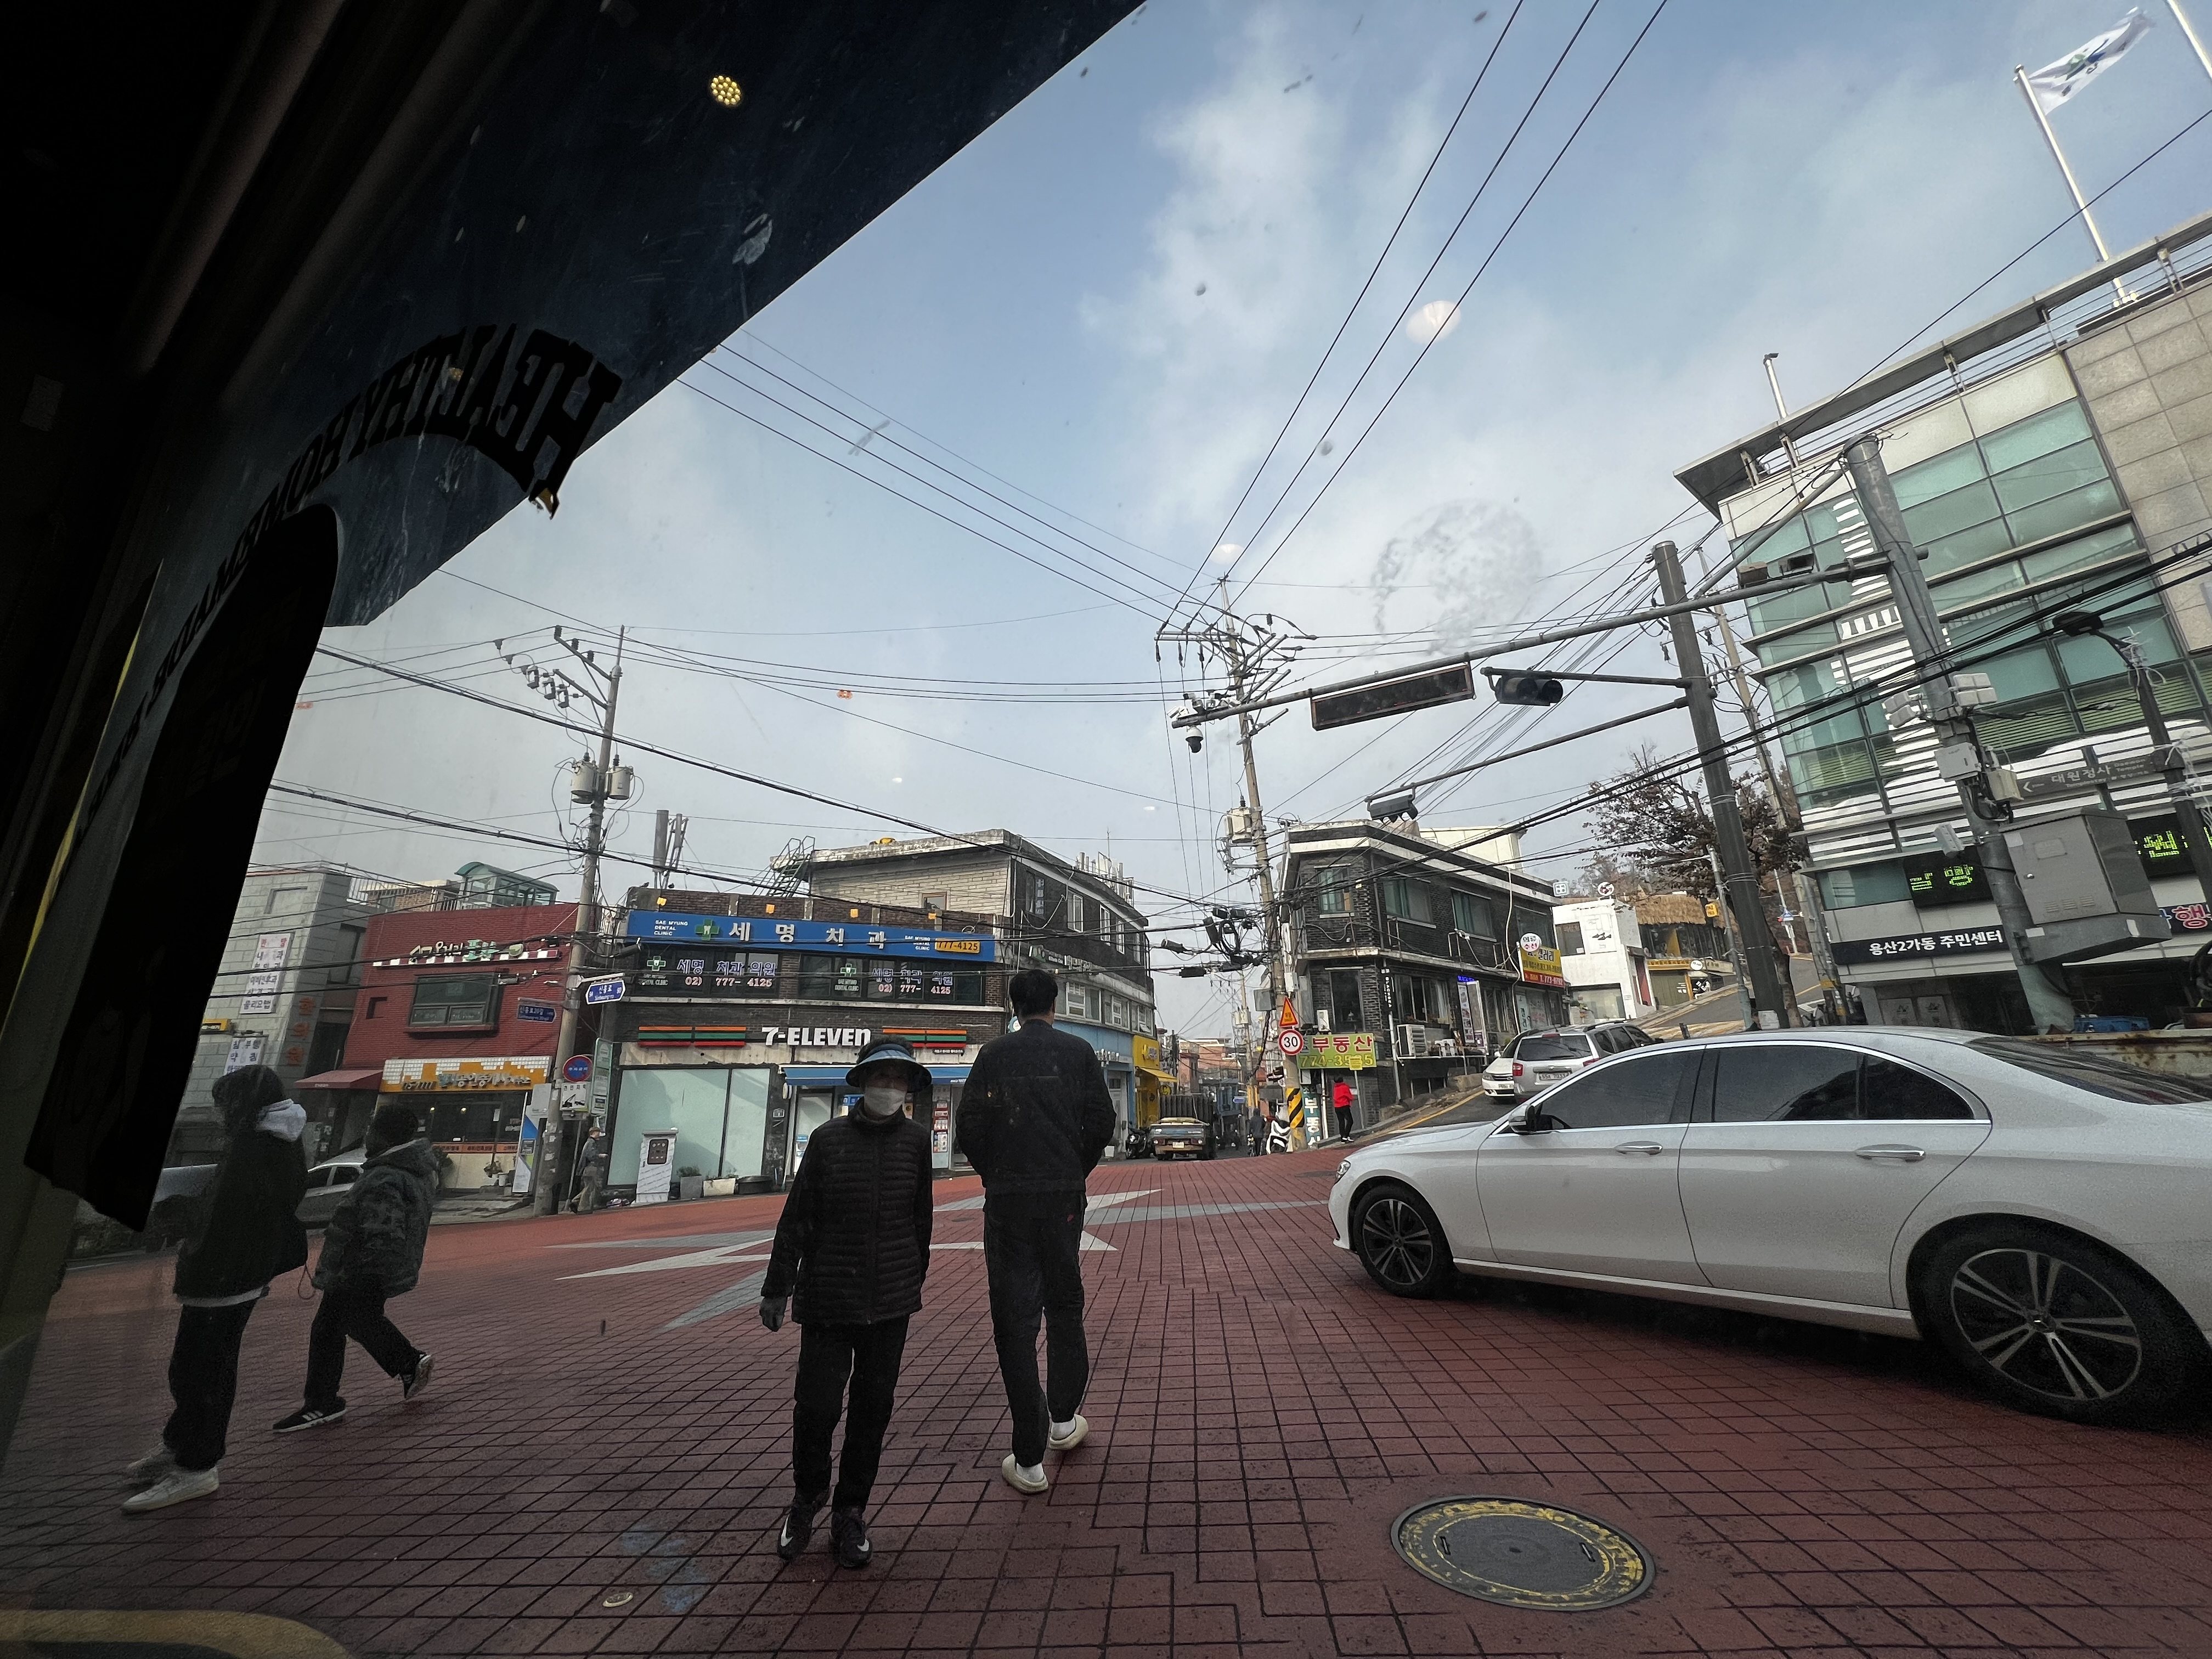 A five-way intersection in Haebangchon, one of Seoul’s last “moon villages”, sees the roads that go up and down Namsan mountain and through Haebangchon meet. ​​There are no traffic lights for cars or pedestrians, but somehow it works. Photo: Erika Na